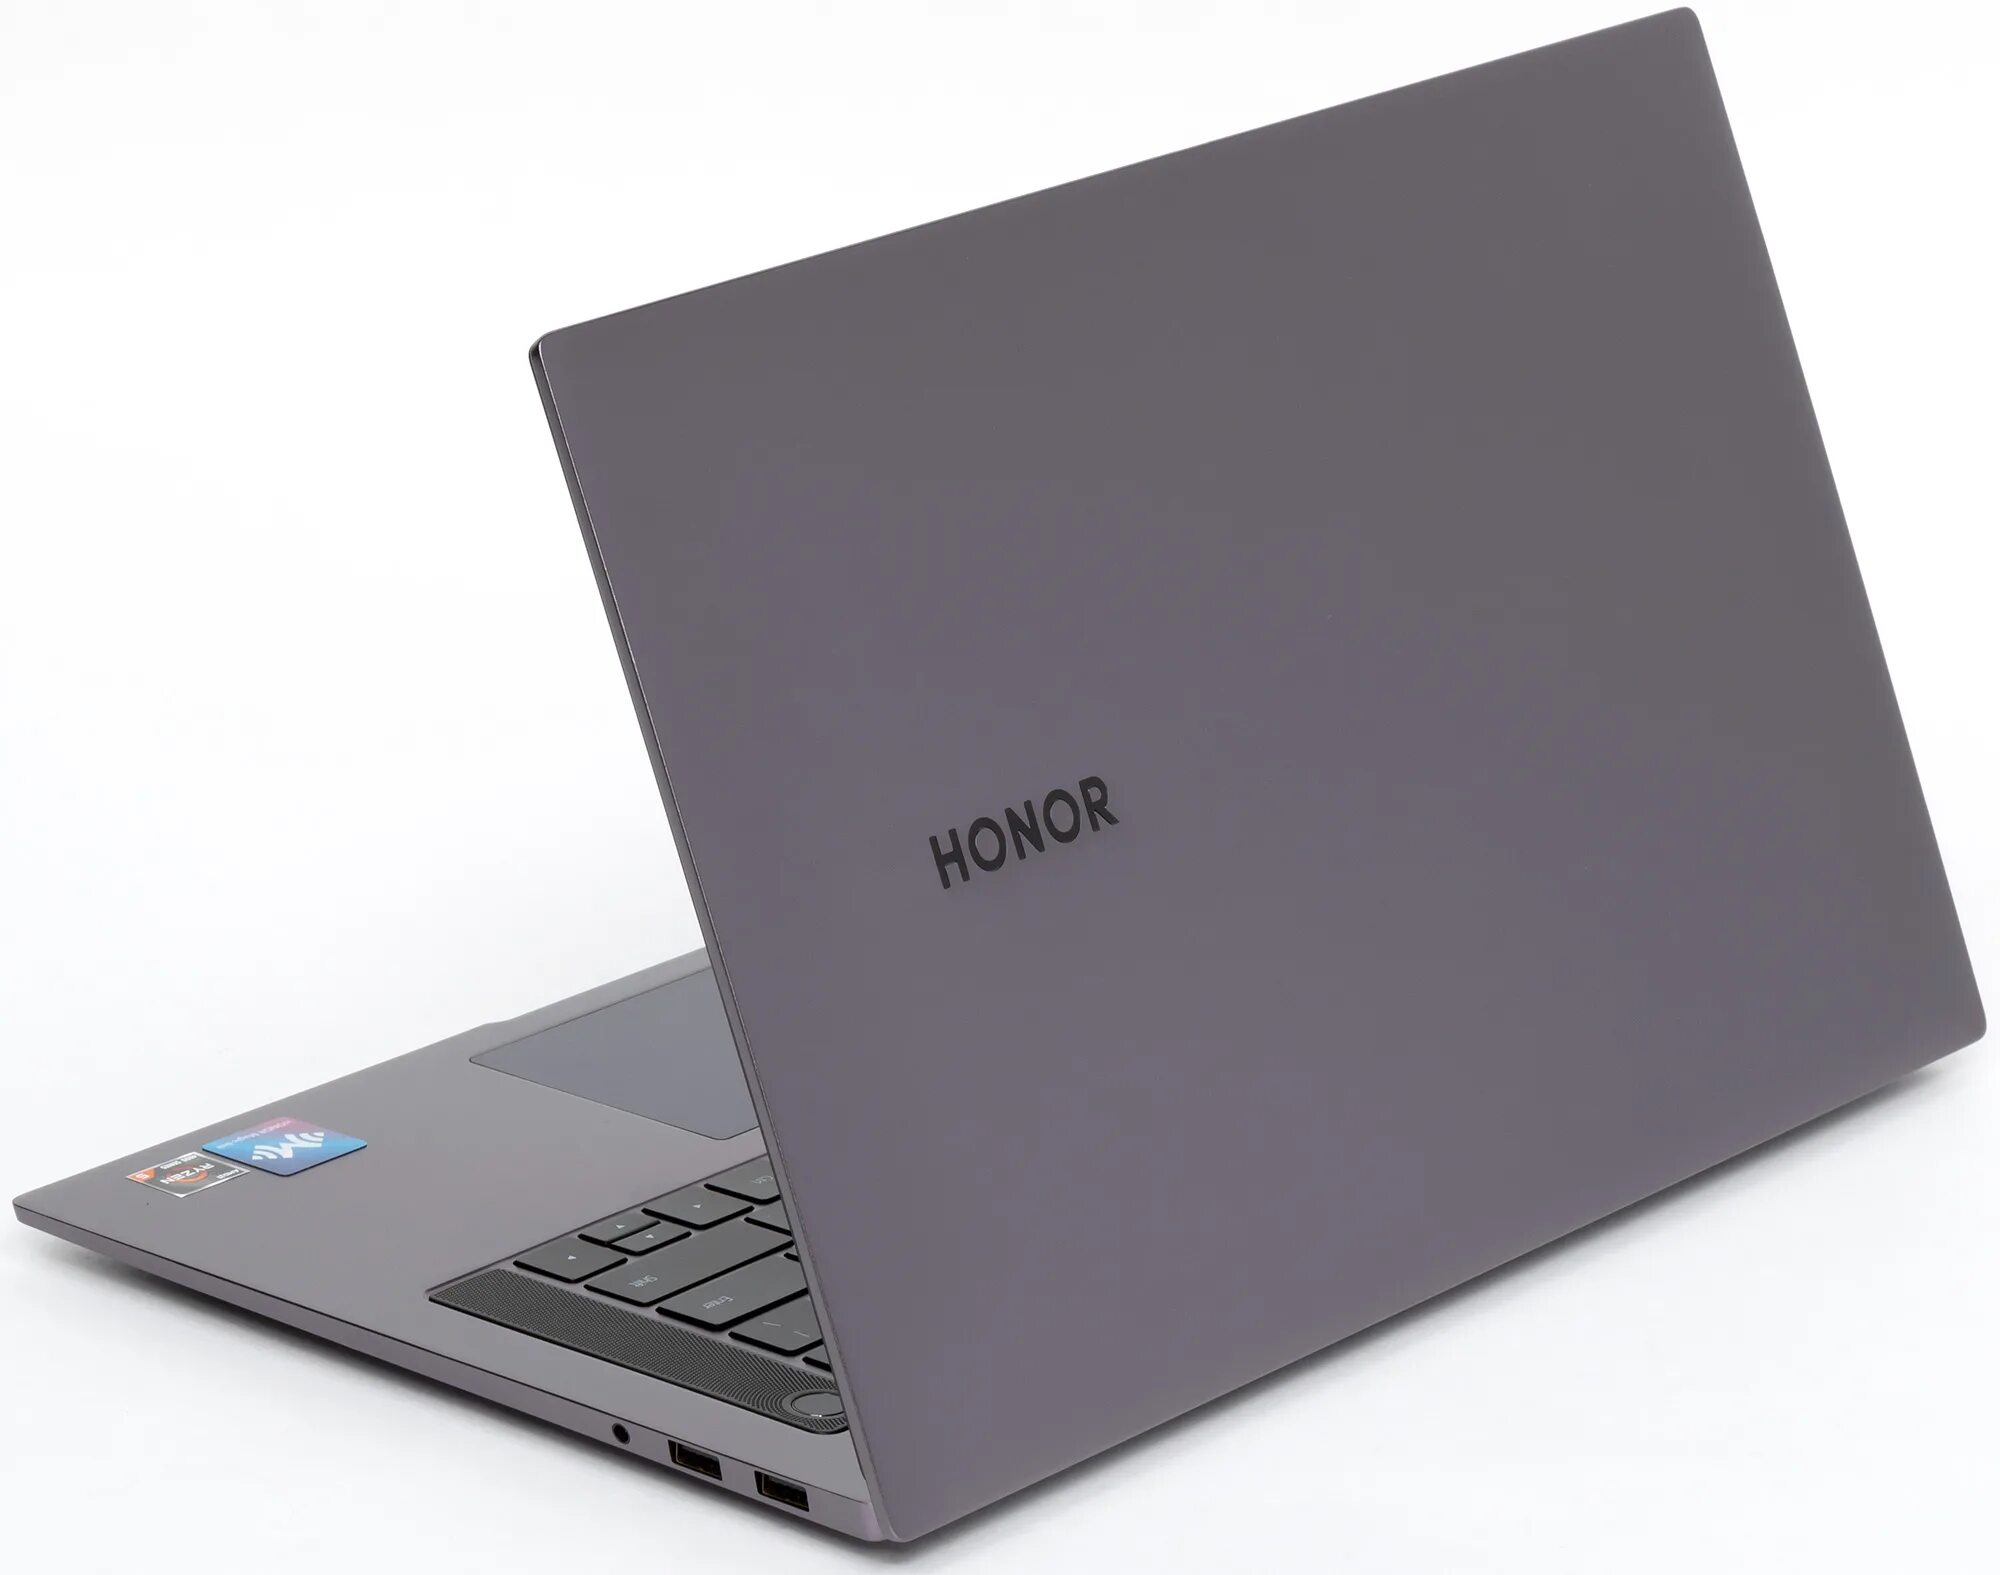 Honor magicbook x16 dos. Ноутбук Honor MAGICBOOK Pro. Ноутбук Honor MAGICBOOK 16. Ноутбук хонор MAGICBOOK 13. Honor MAGICBOOK Pro 16.1.